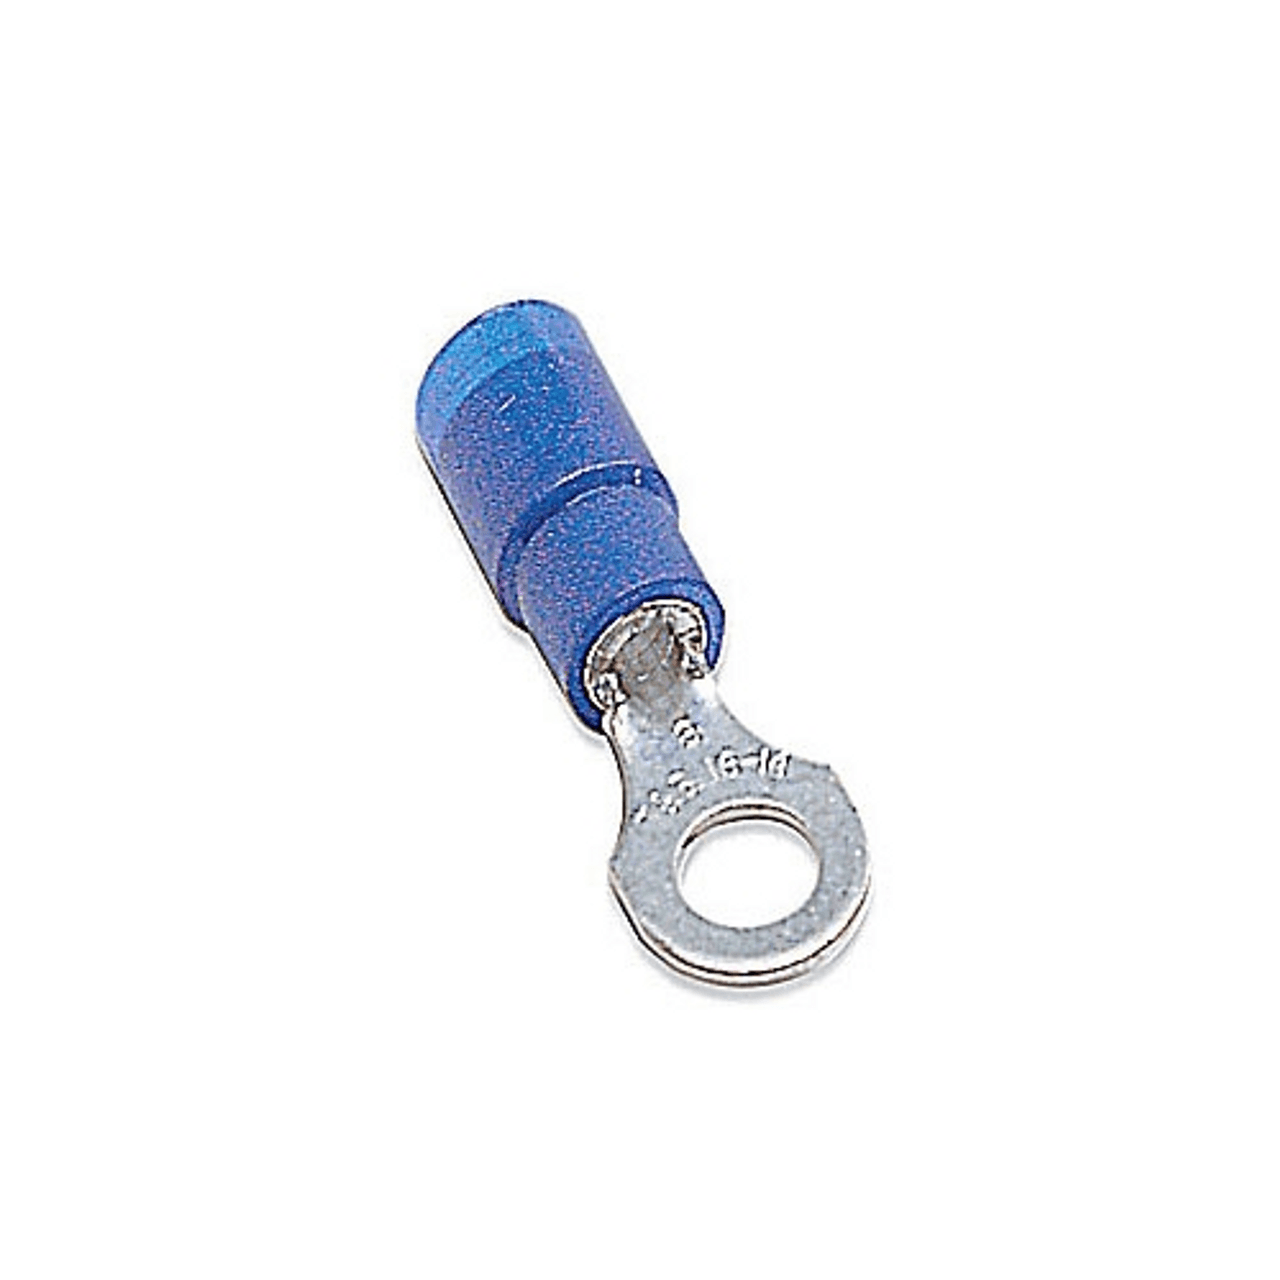 Thomas & Betts RB14-8X 18 to 14 AWG, #8 Stud, 600 V, Blue, Tin Plated Copper, Nylon Insulated, Expanded Entry, Electrical